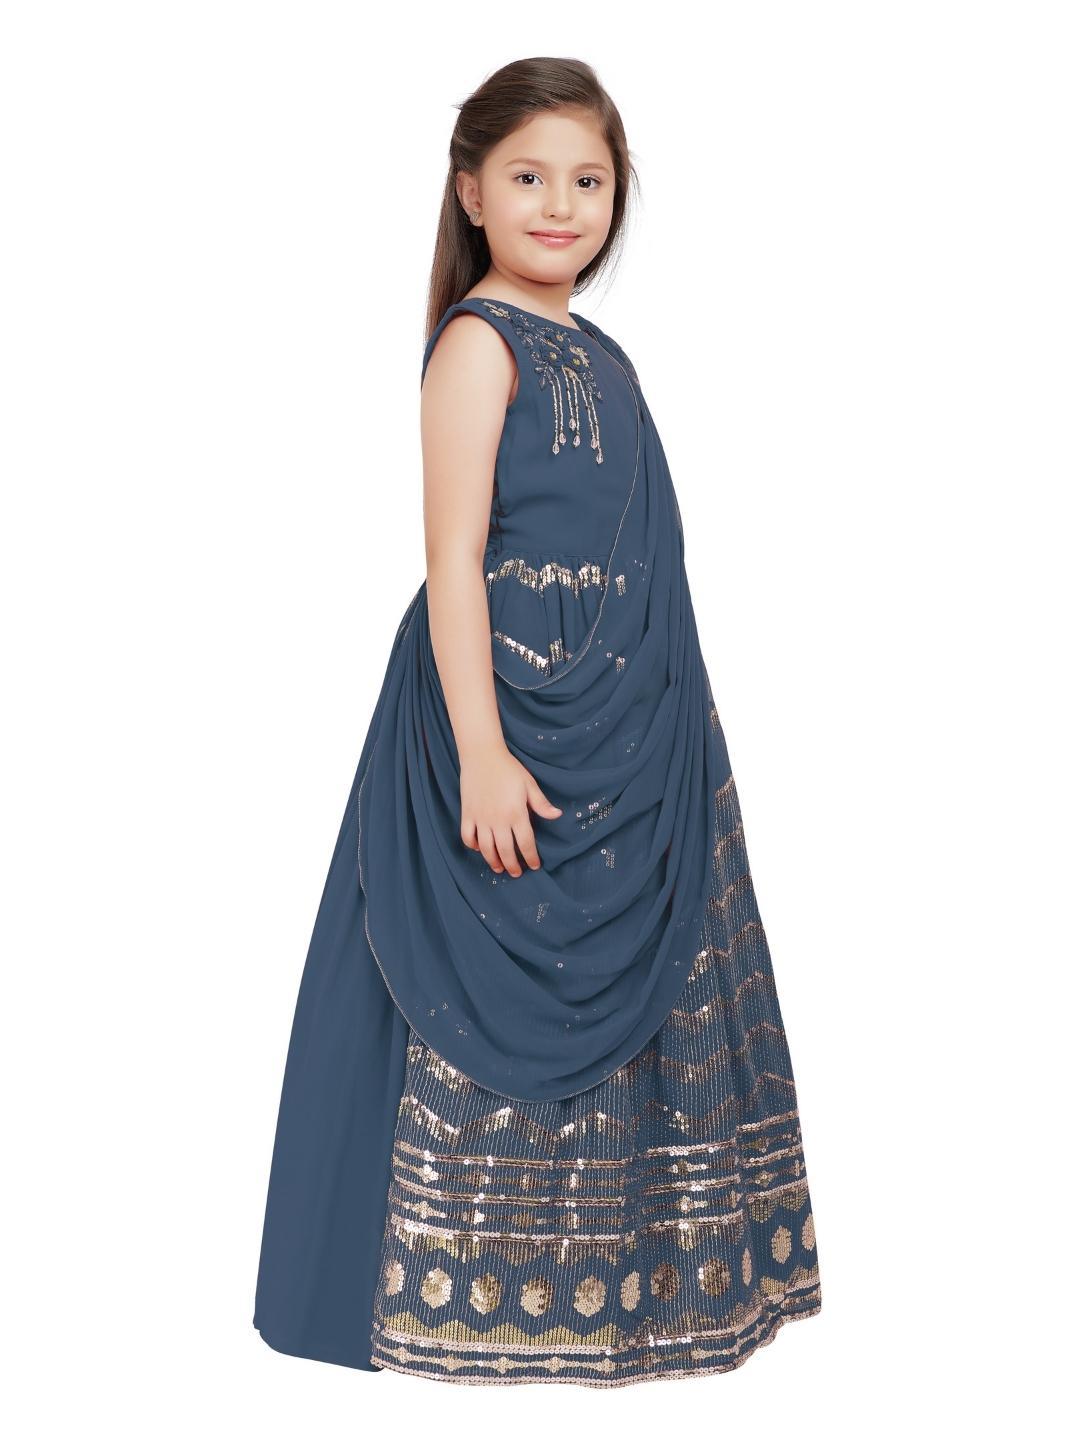 The Viena's - designer women's wear - Off shoulder indo-western gown... A  gown with dupatta attached and off shoulder style. #stylish #fashion  #ladies #female #dress #indian #partygirl #parties #instapost #instafashion  #dailyfashion #dailypost #